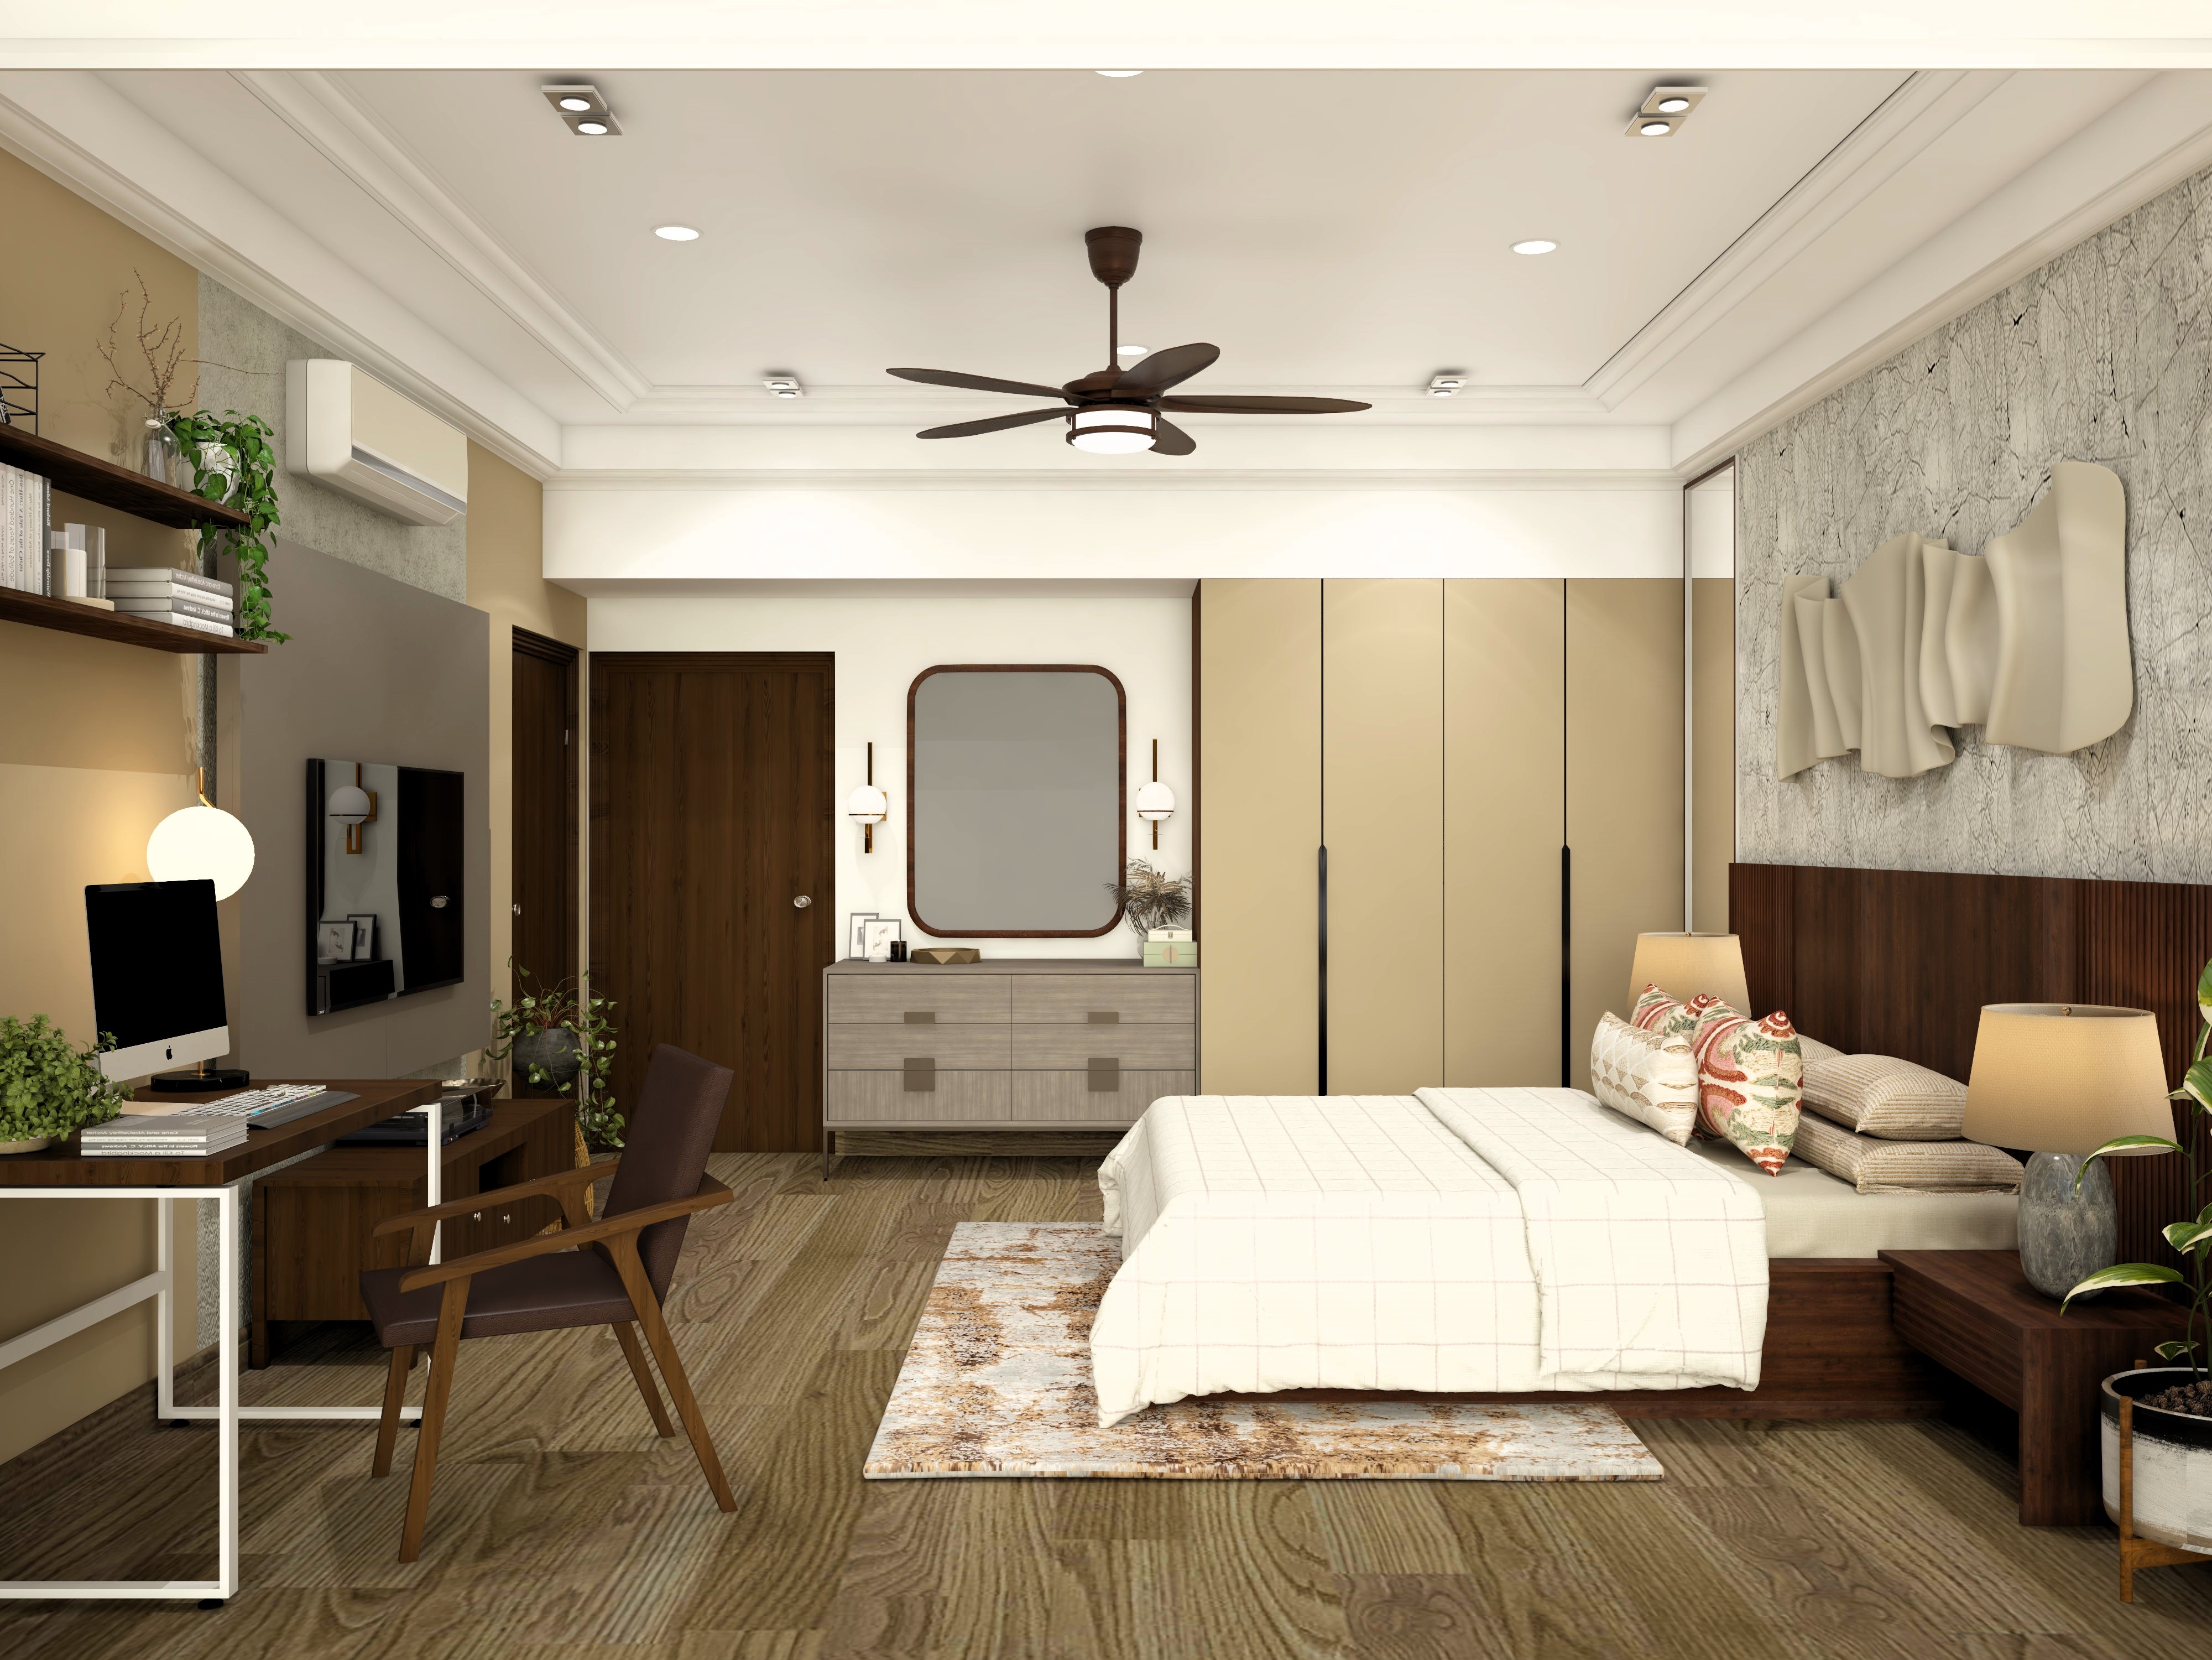 Chic bedroom design with brown accents and wooden flooring-Beautiful Homes